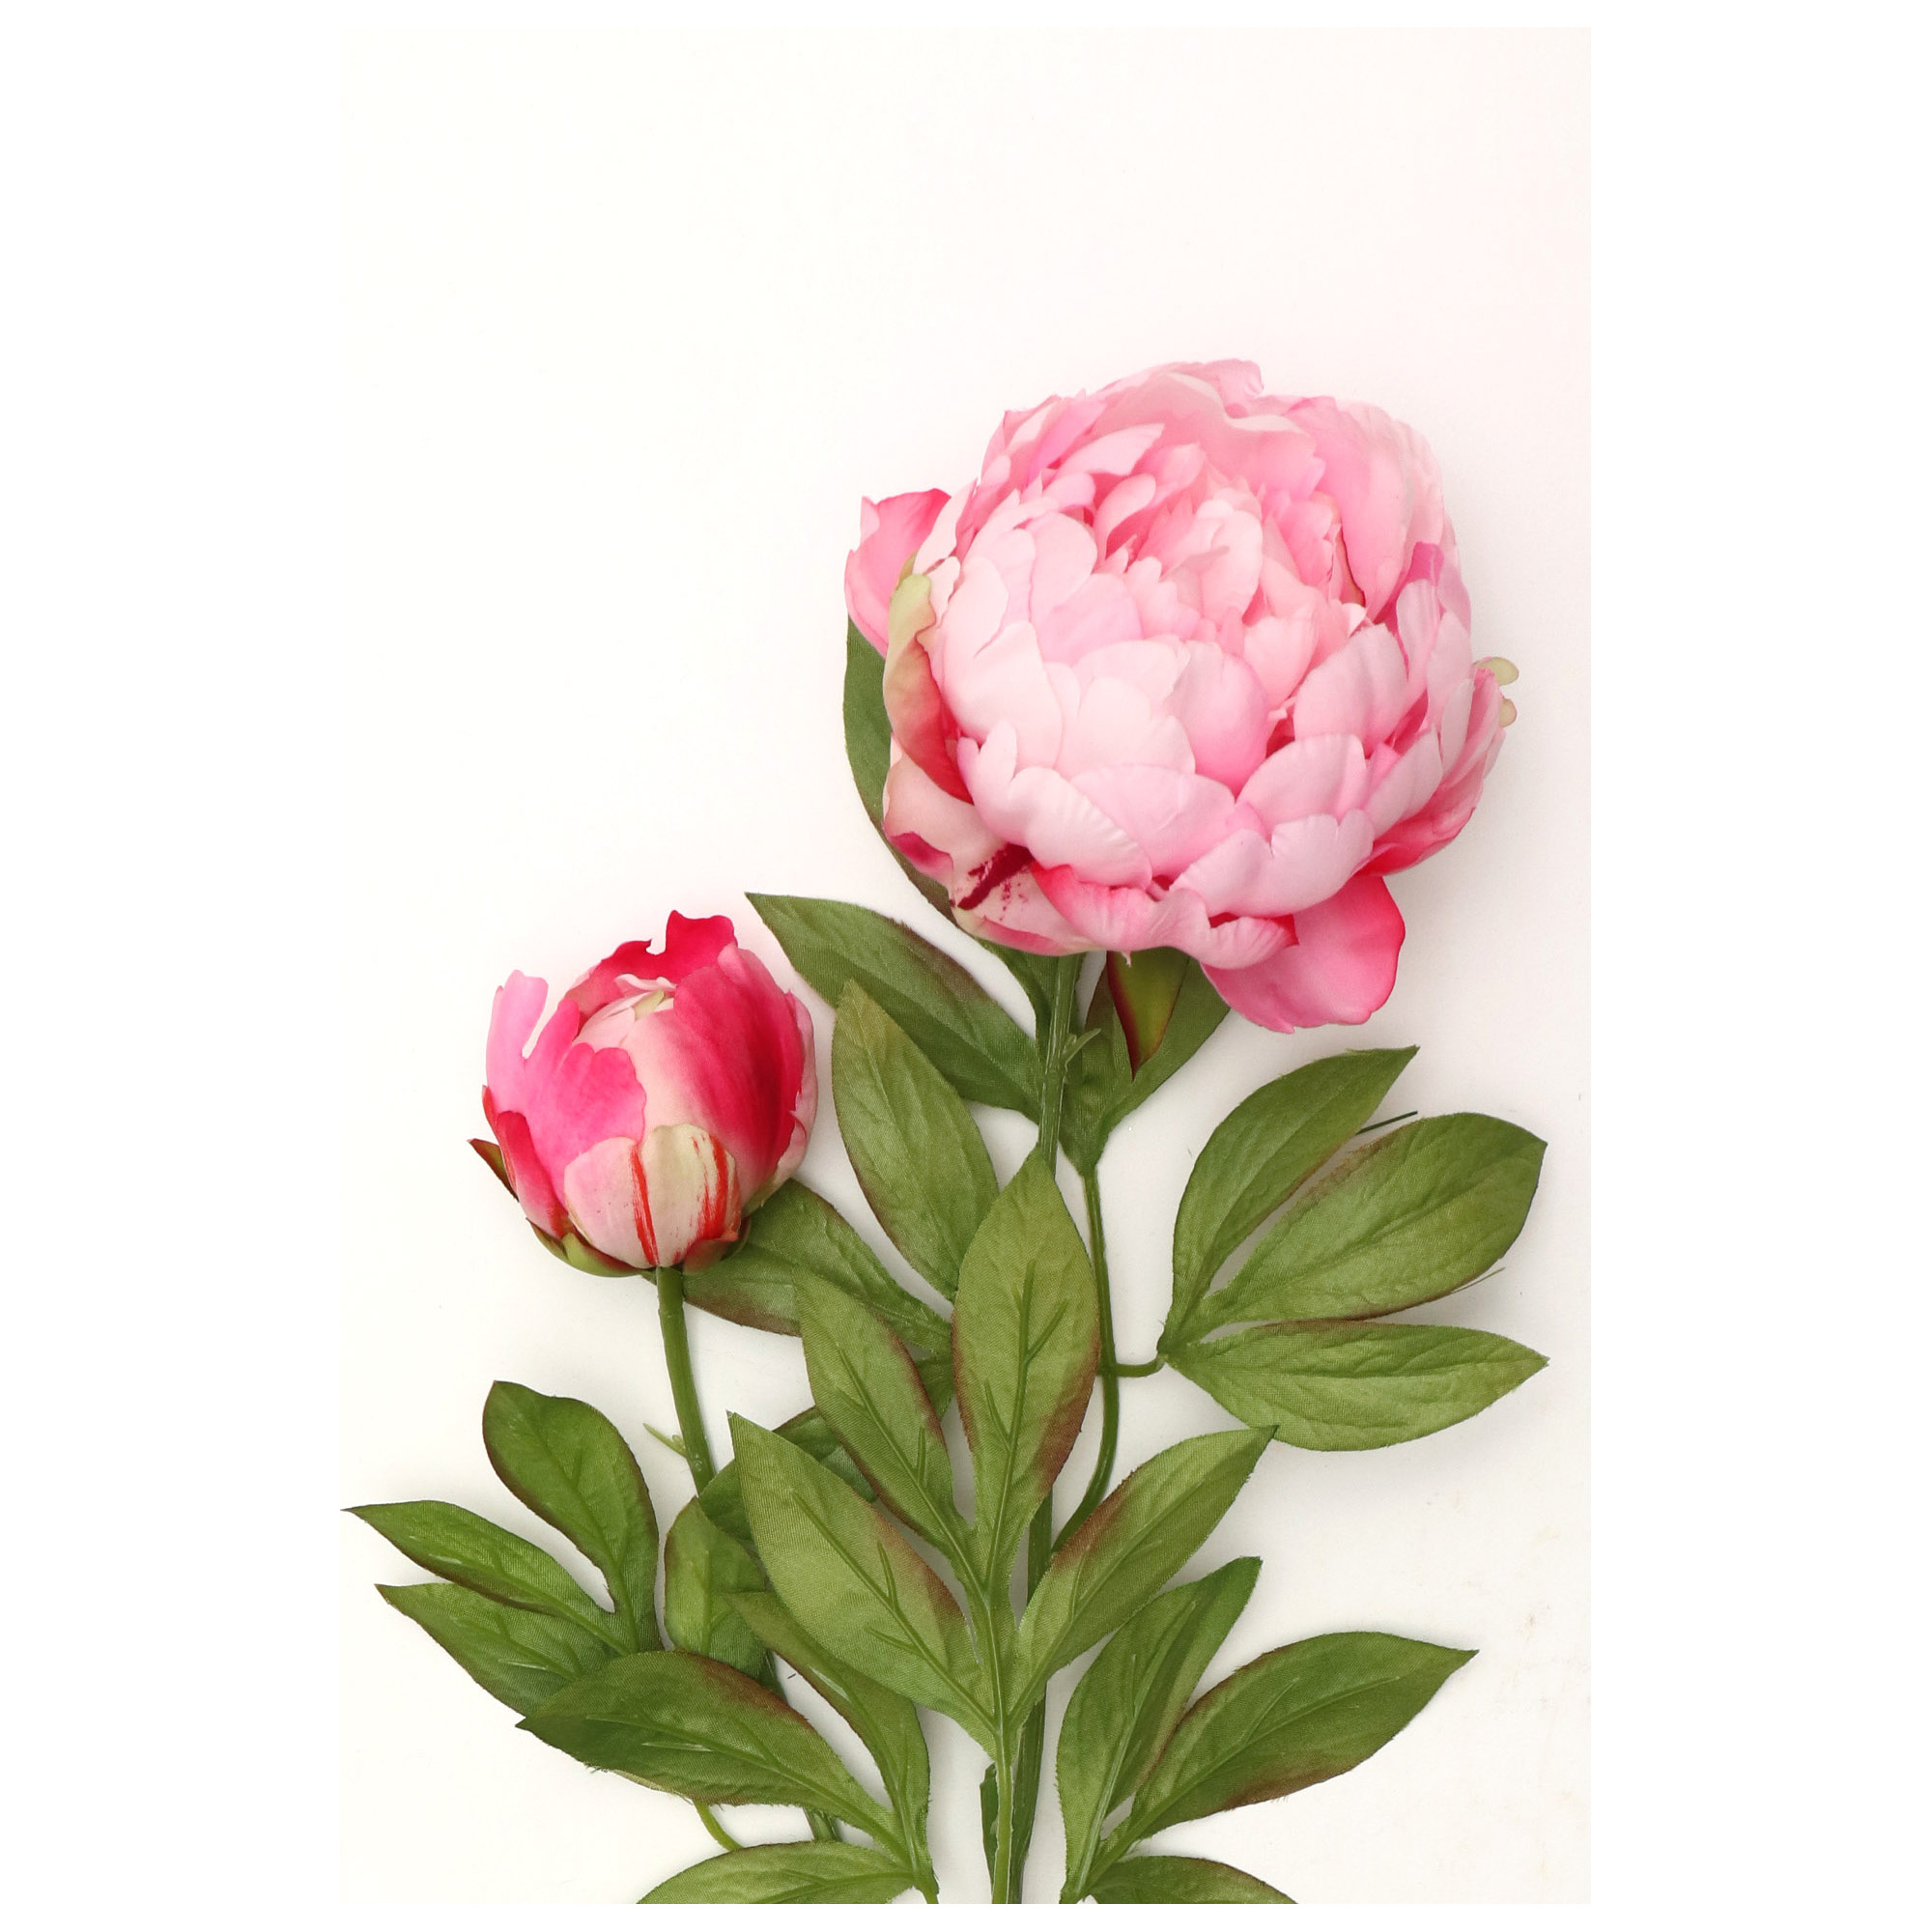 Mainstays 27" Tall Artificial Pink Peony Flower Indoor Stem - image 4 of 5